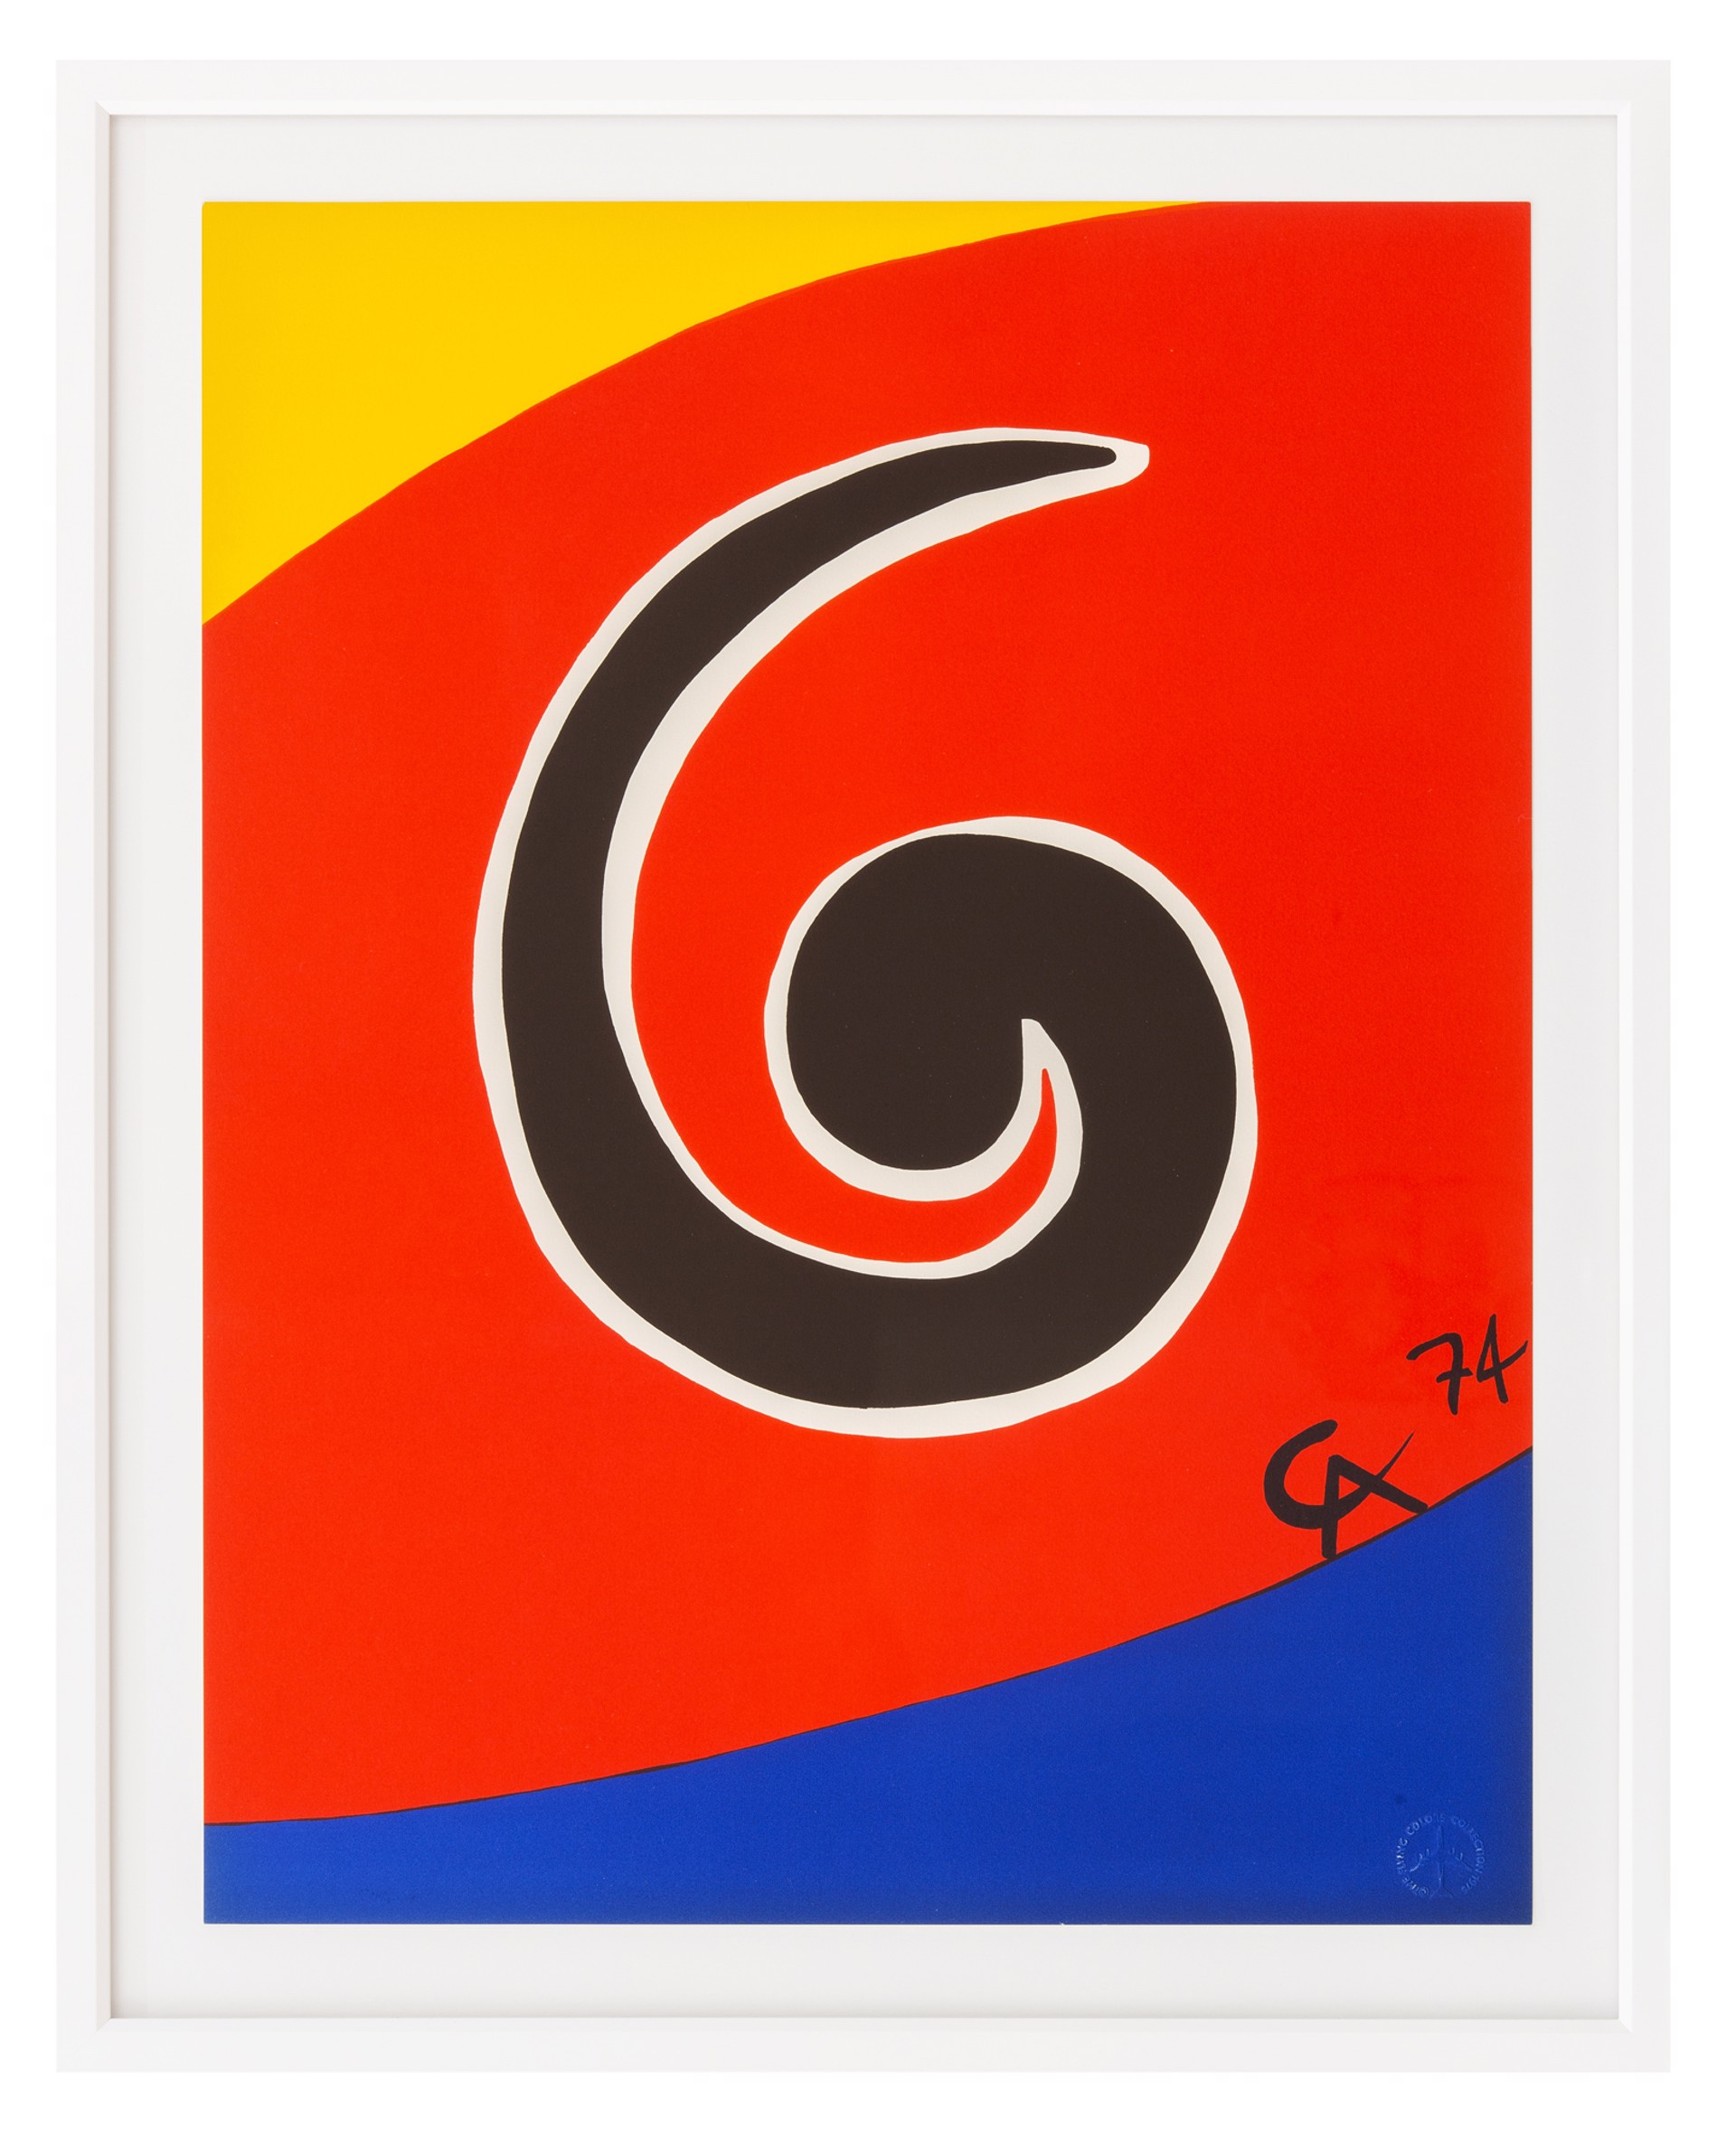 Skyswirl (from Flying Colors) by Alexander Calder